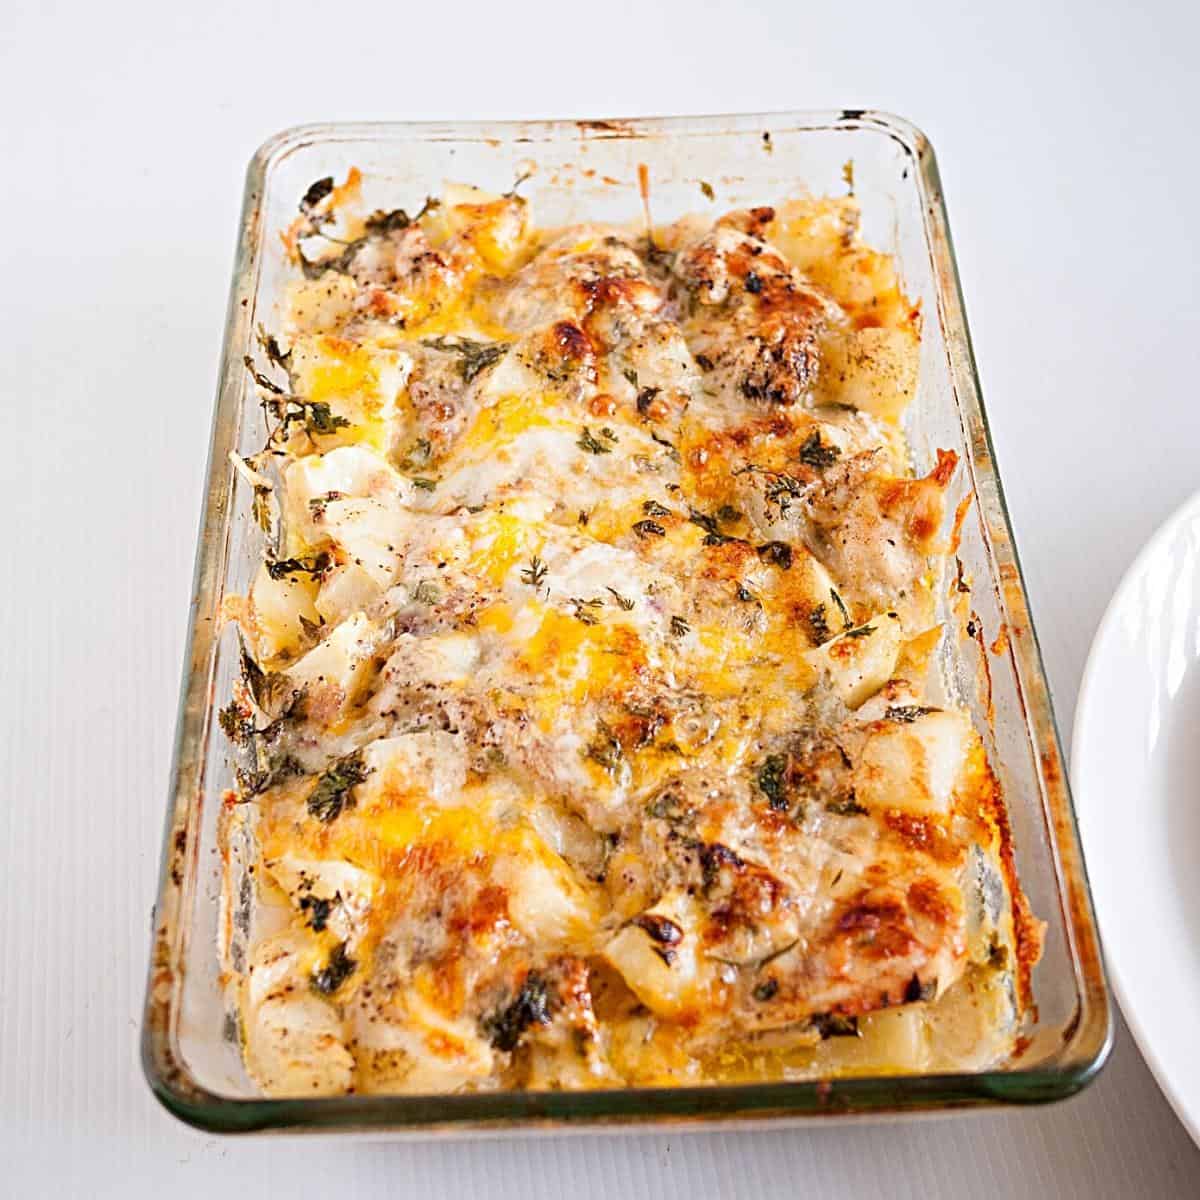 A glass casserole dish with baked chicken and potatoes.